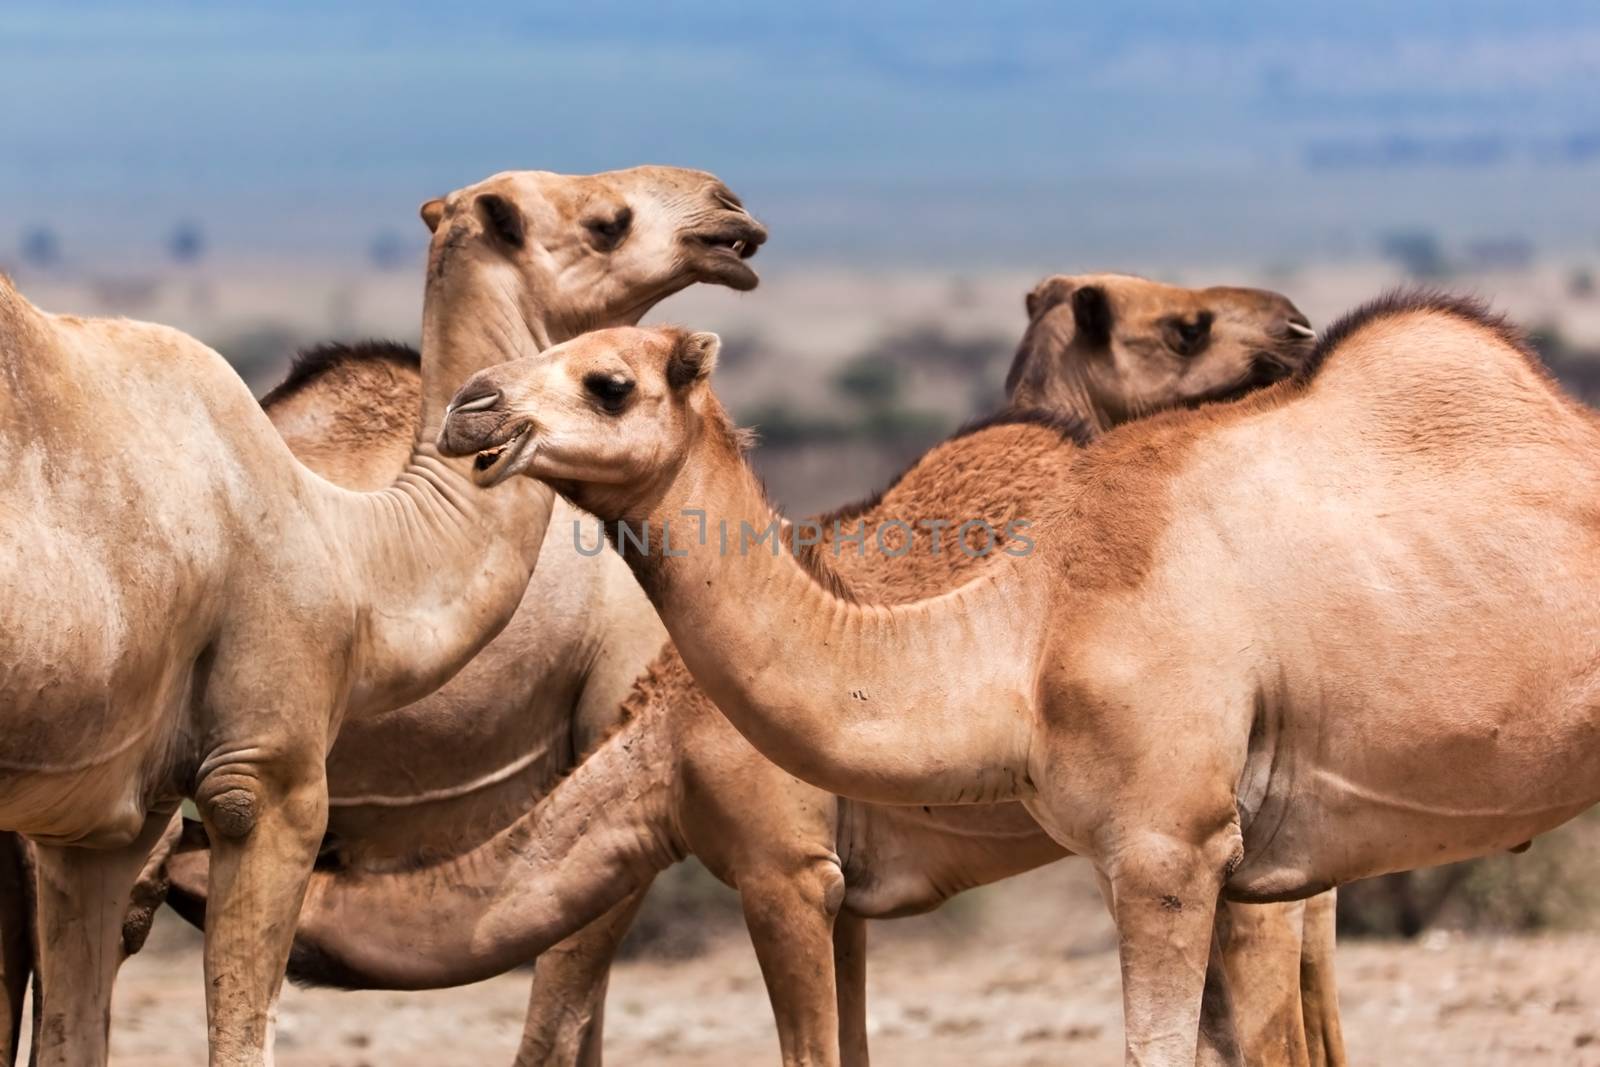 Group of camels under the tree in Africa